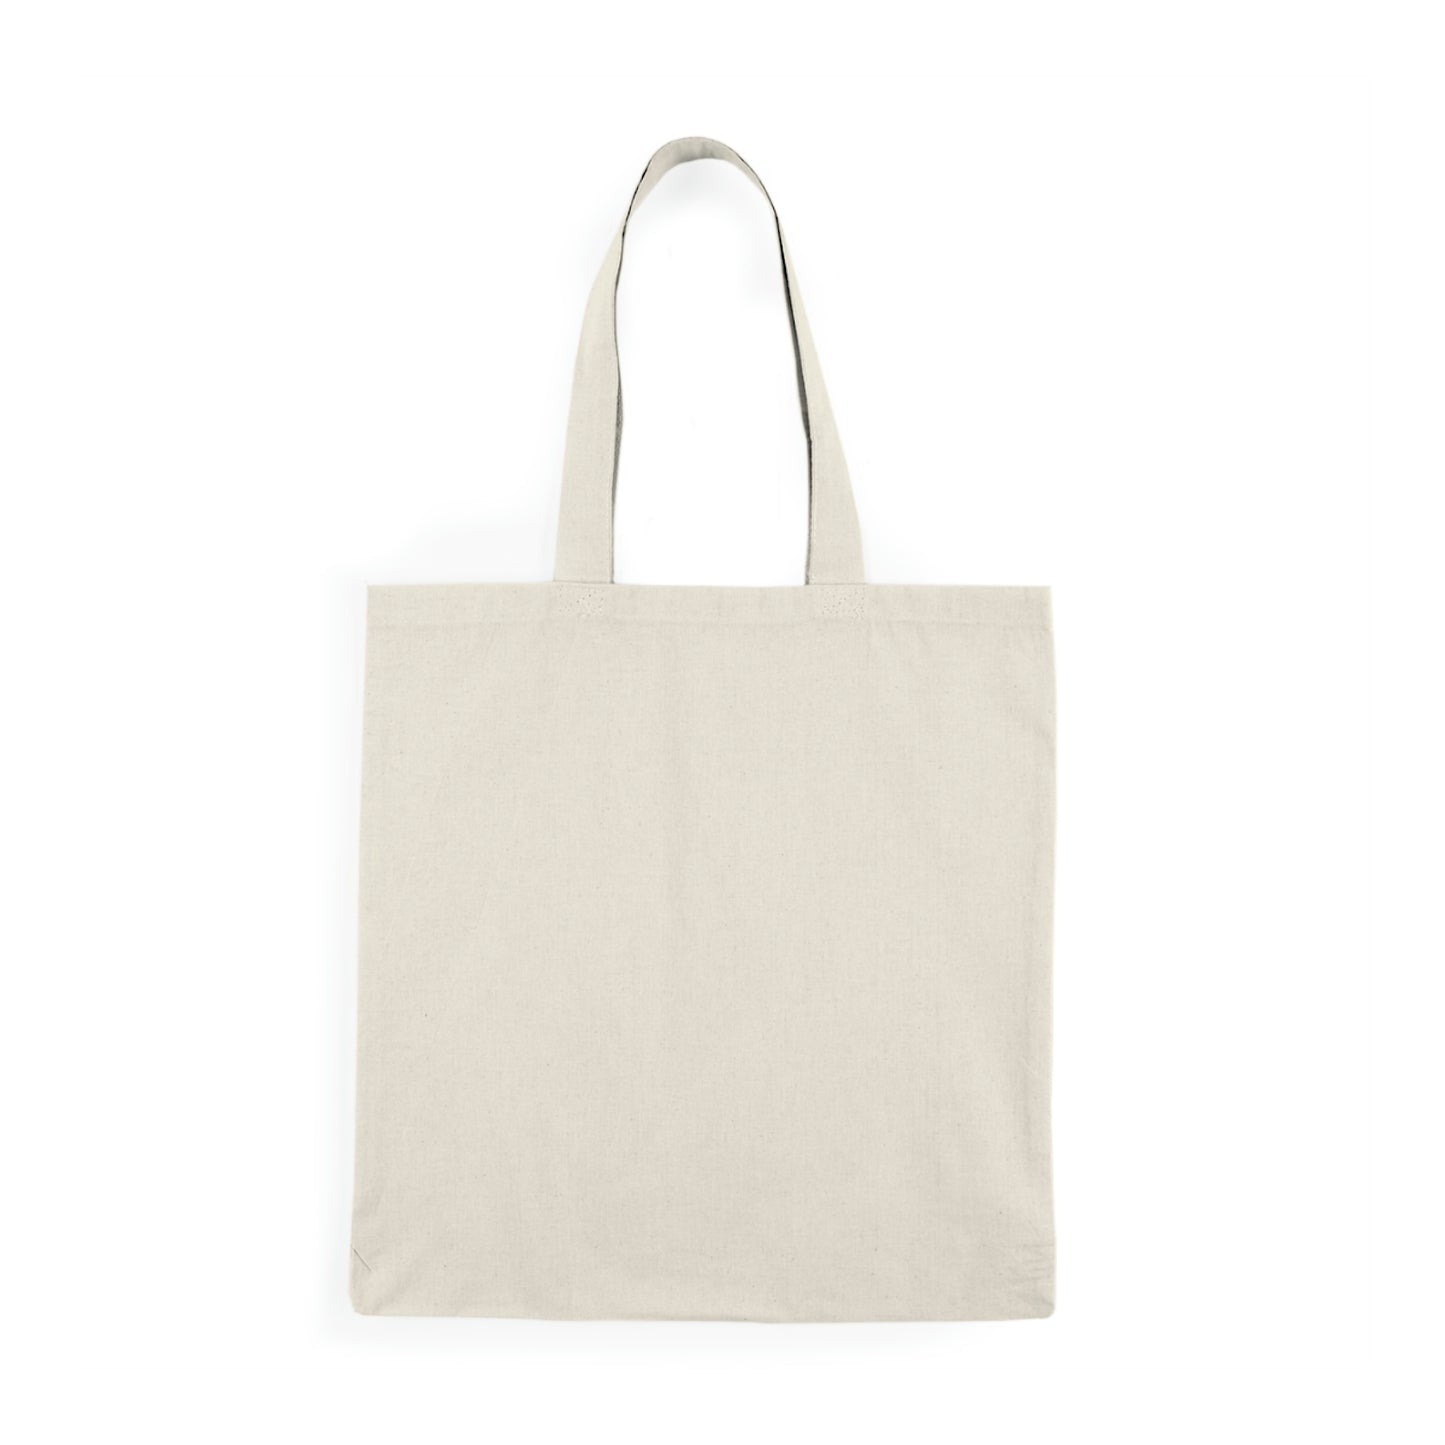 The Knowledge of Love - Natural Tote Bag